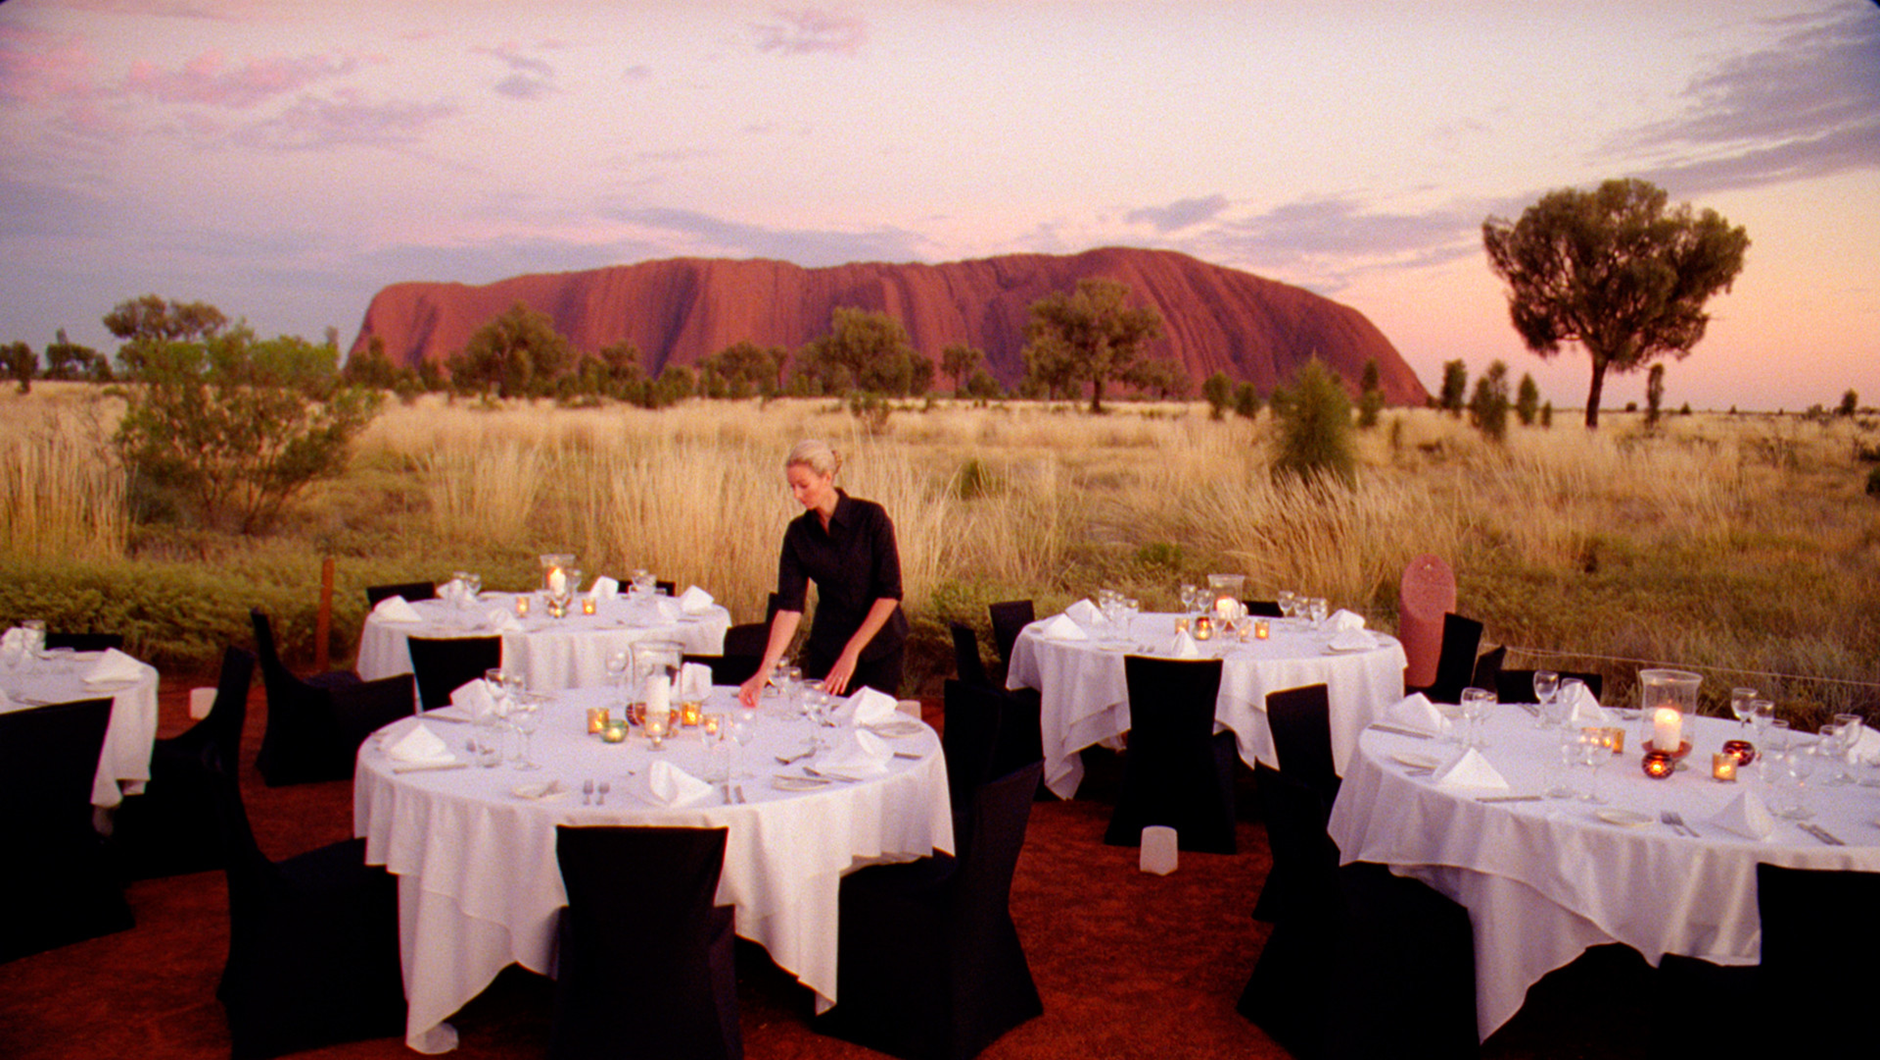 Sounds of Silence Dinner_Ayers Rock Resort Business Events